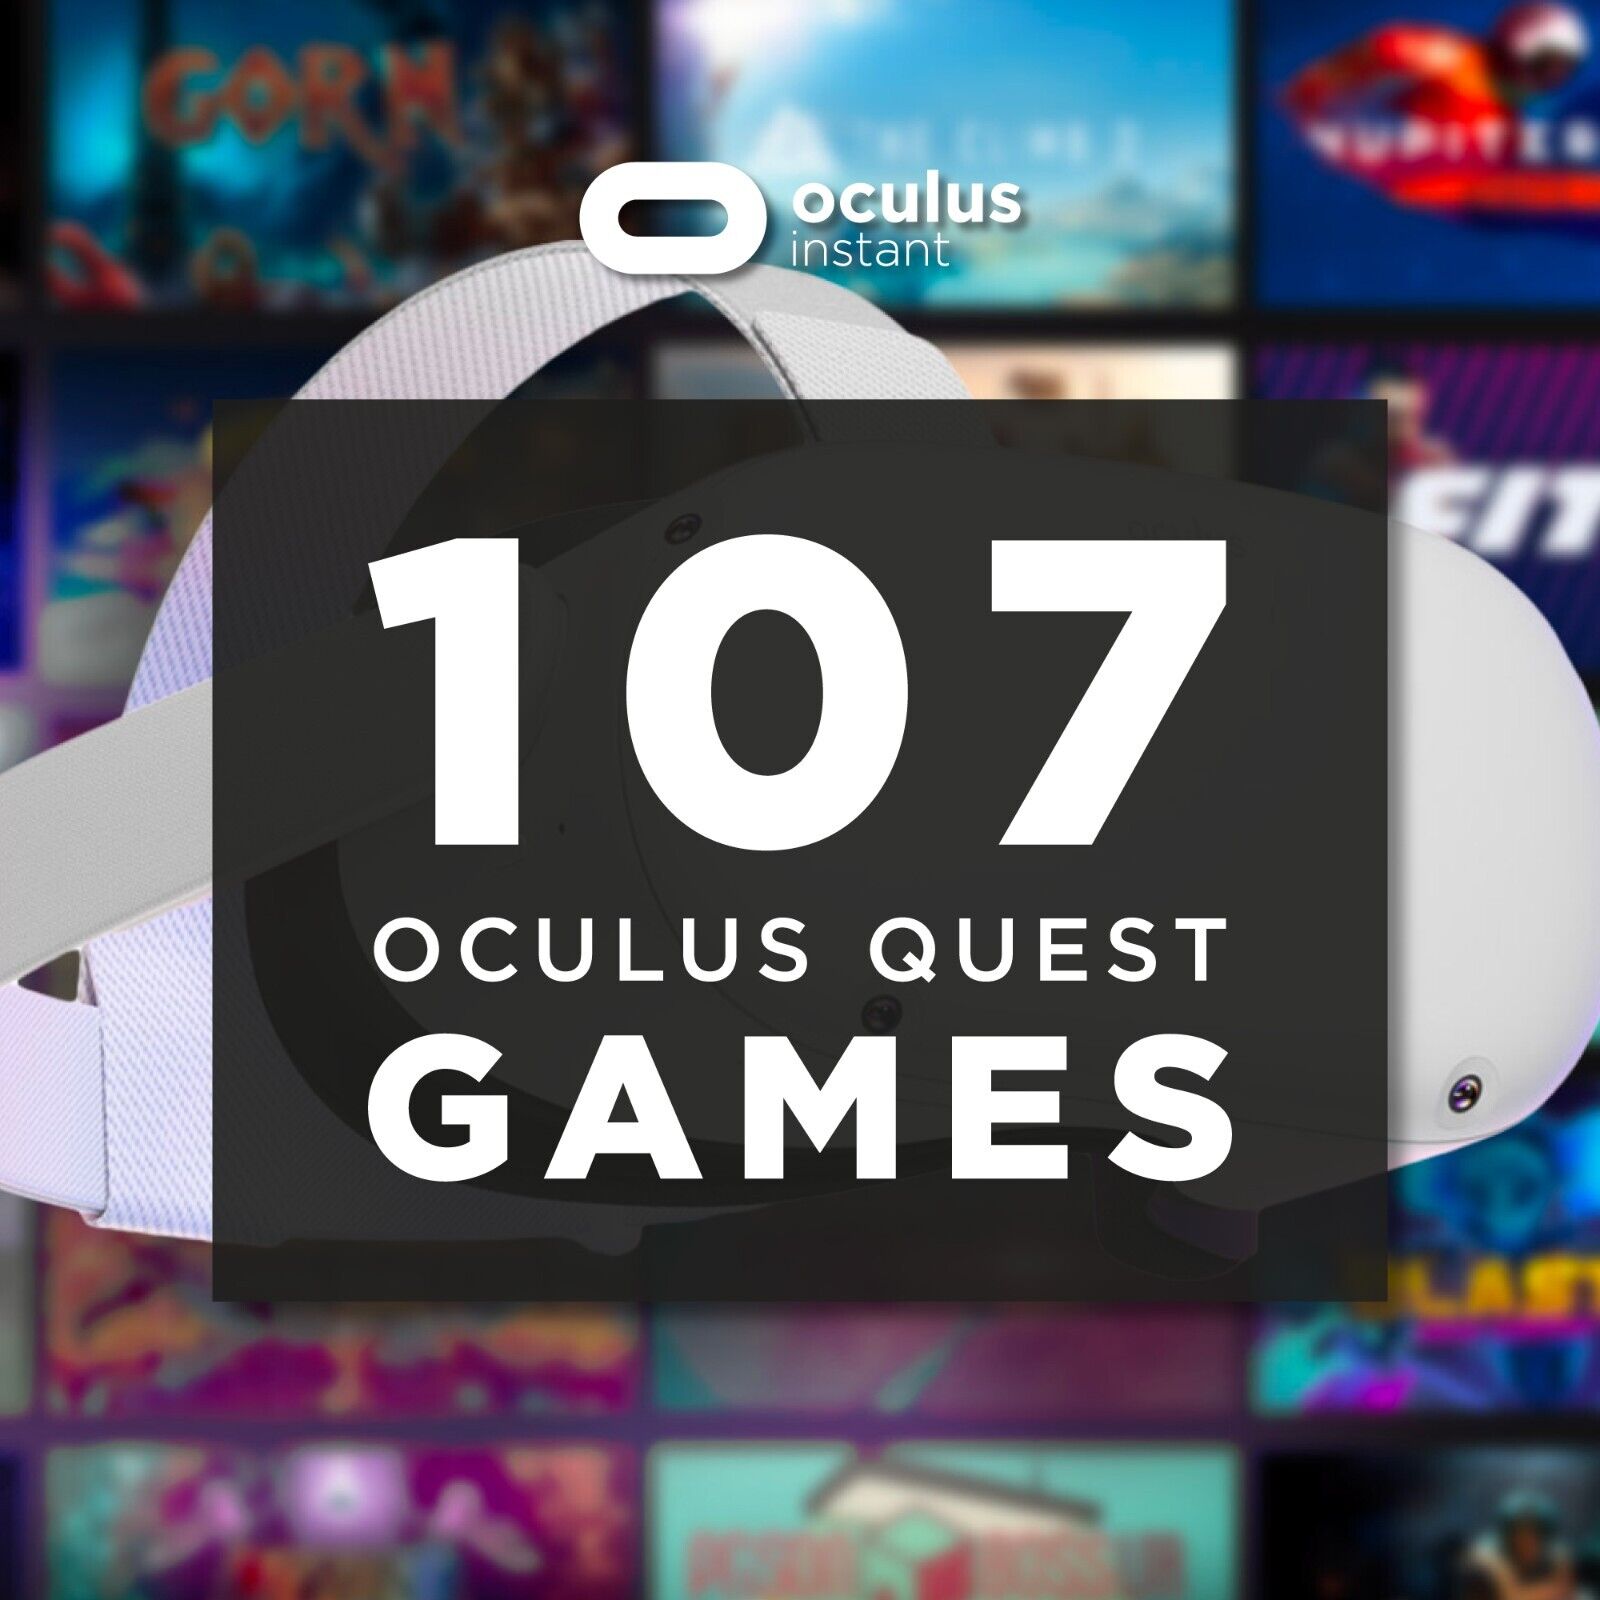 Oculus Meta Quest 2 Files - Top 107 Games - Full Support Provided - Sidequest